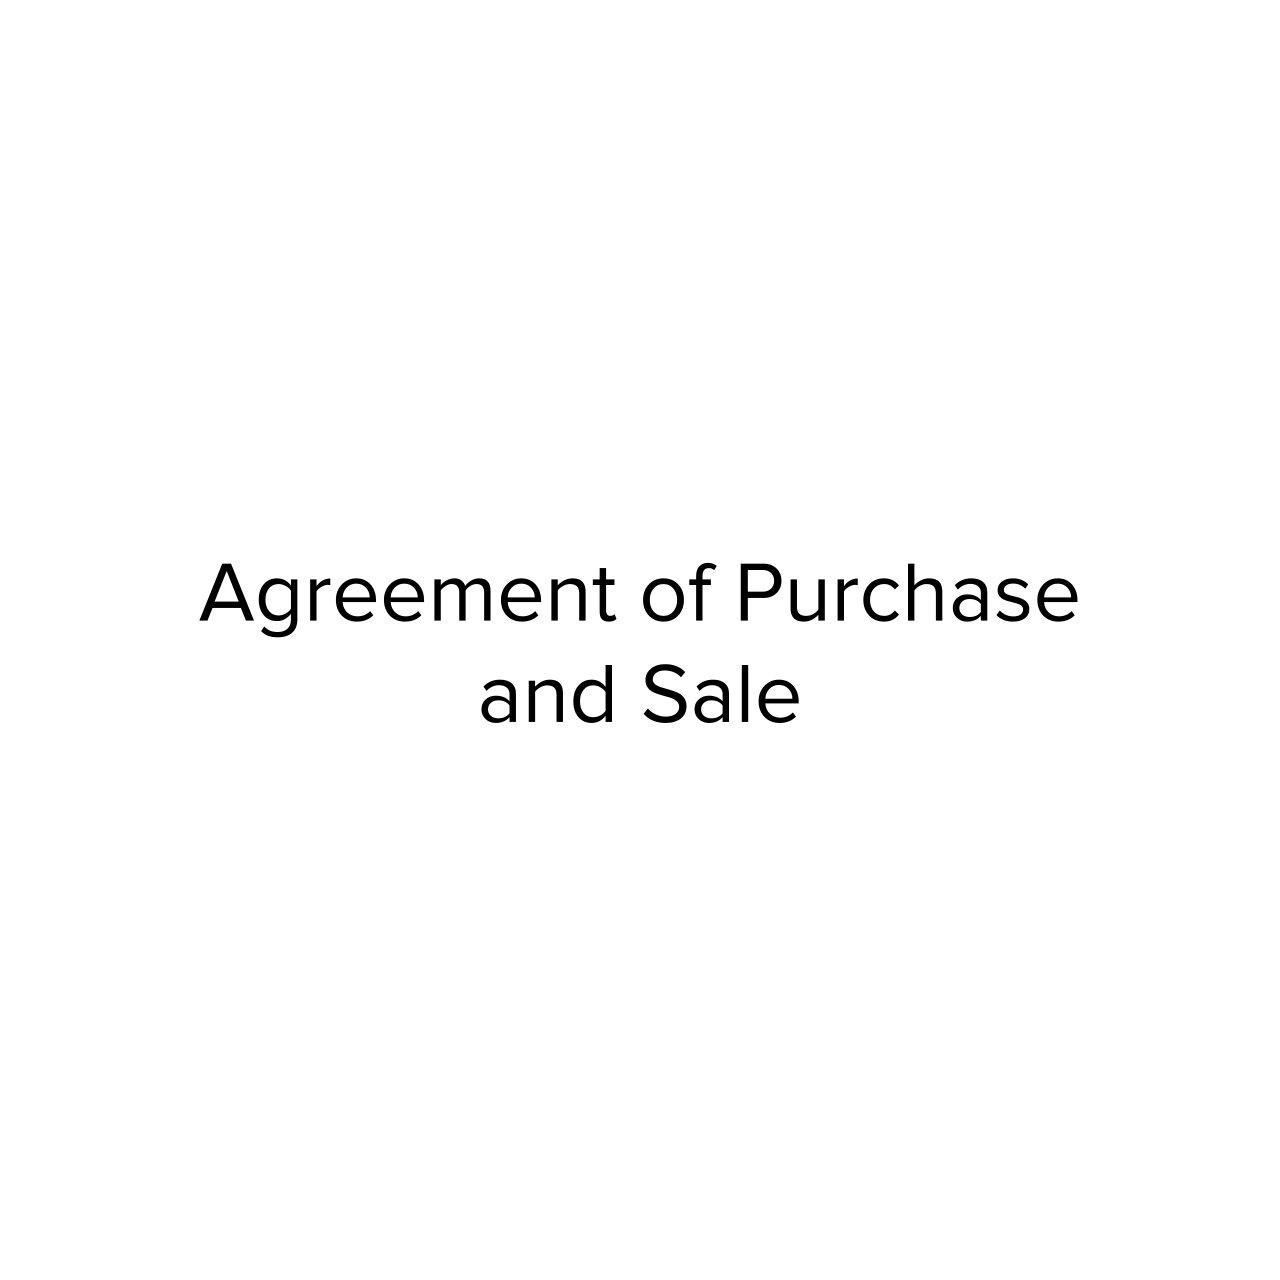 Agreement of Purchase  and Sale.jpg